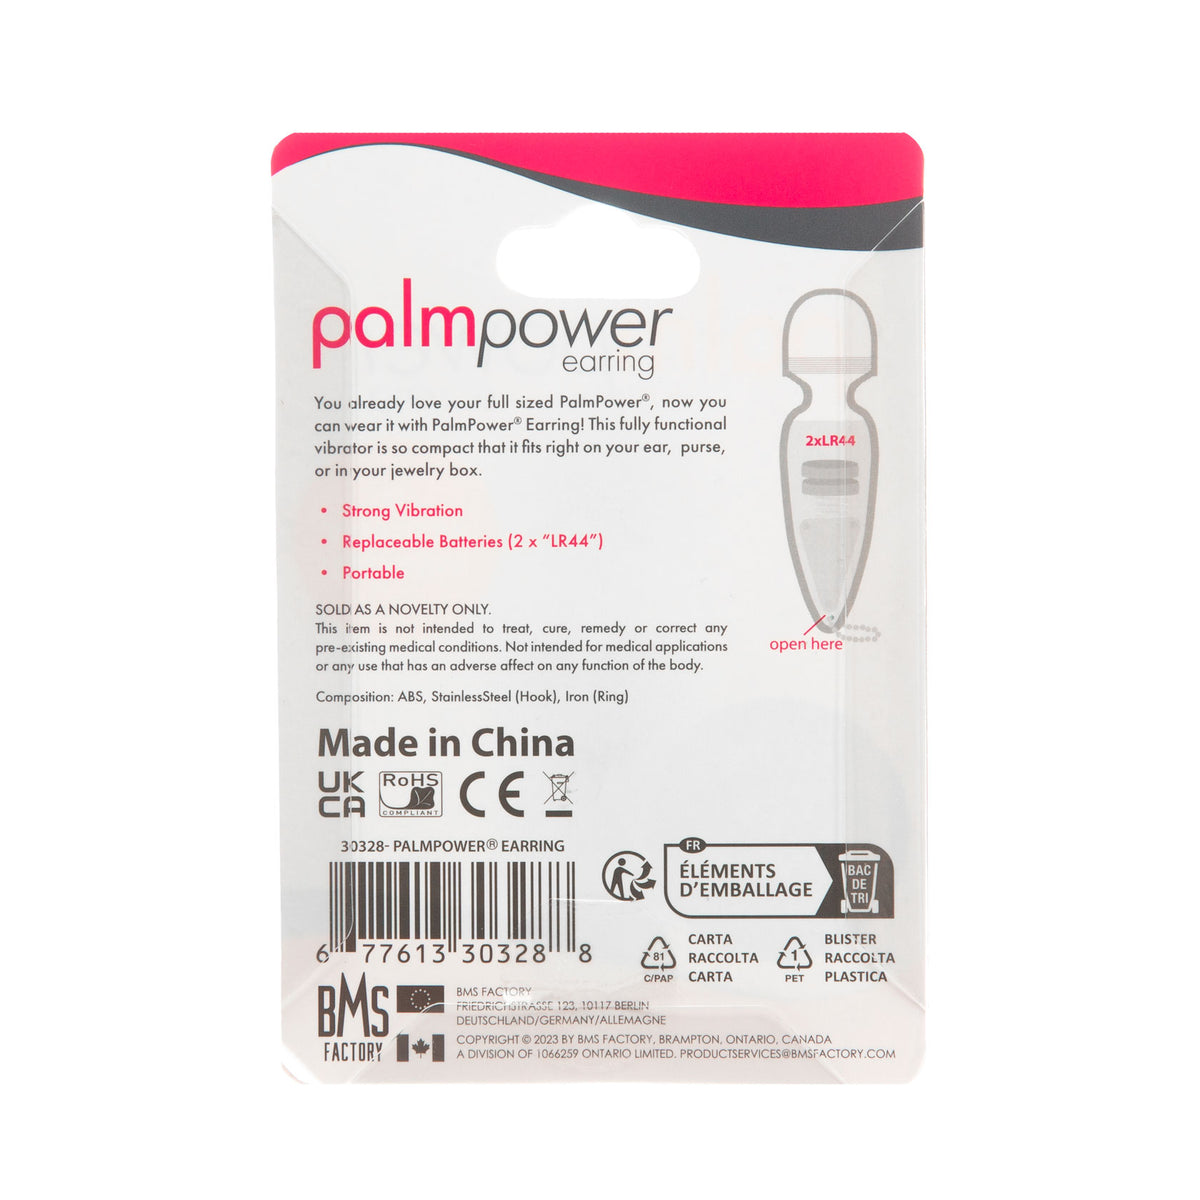 PalmPower – Micro Massager Earring – 1 piece